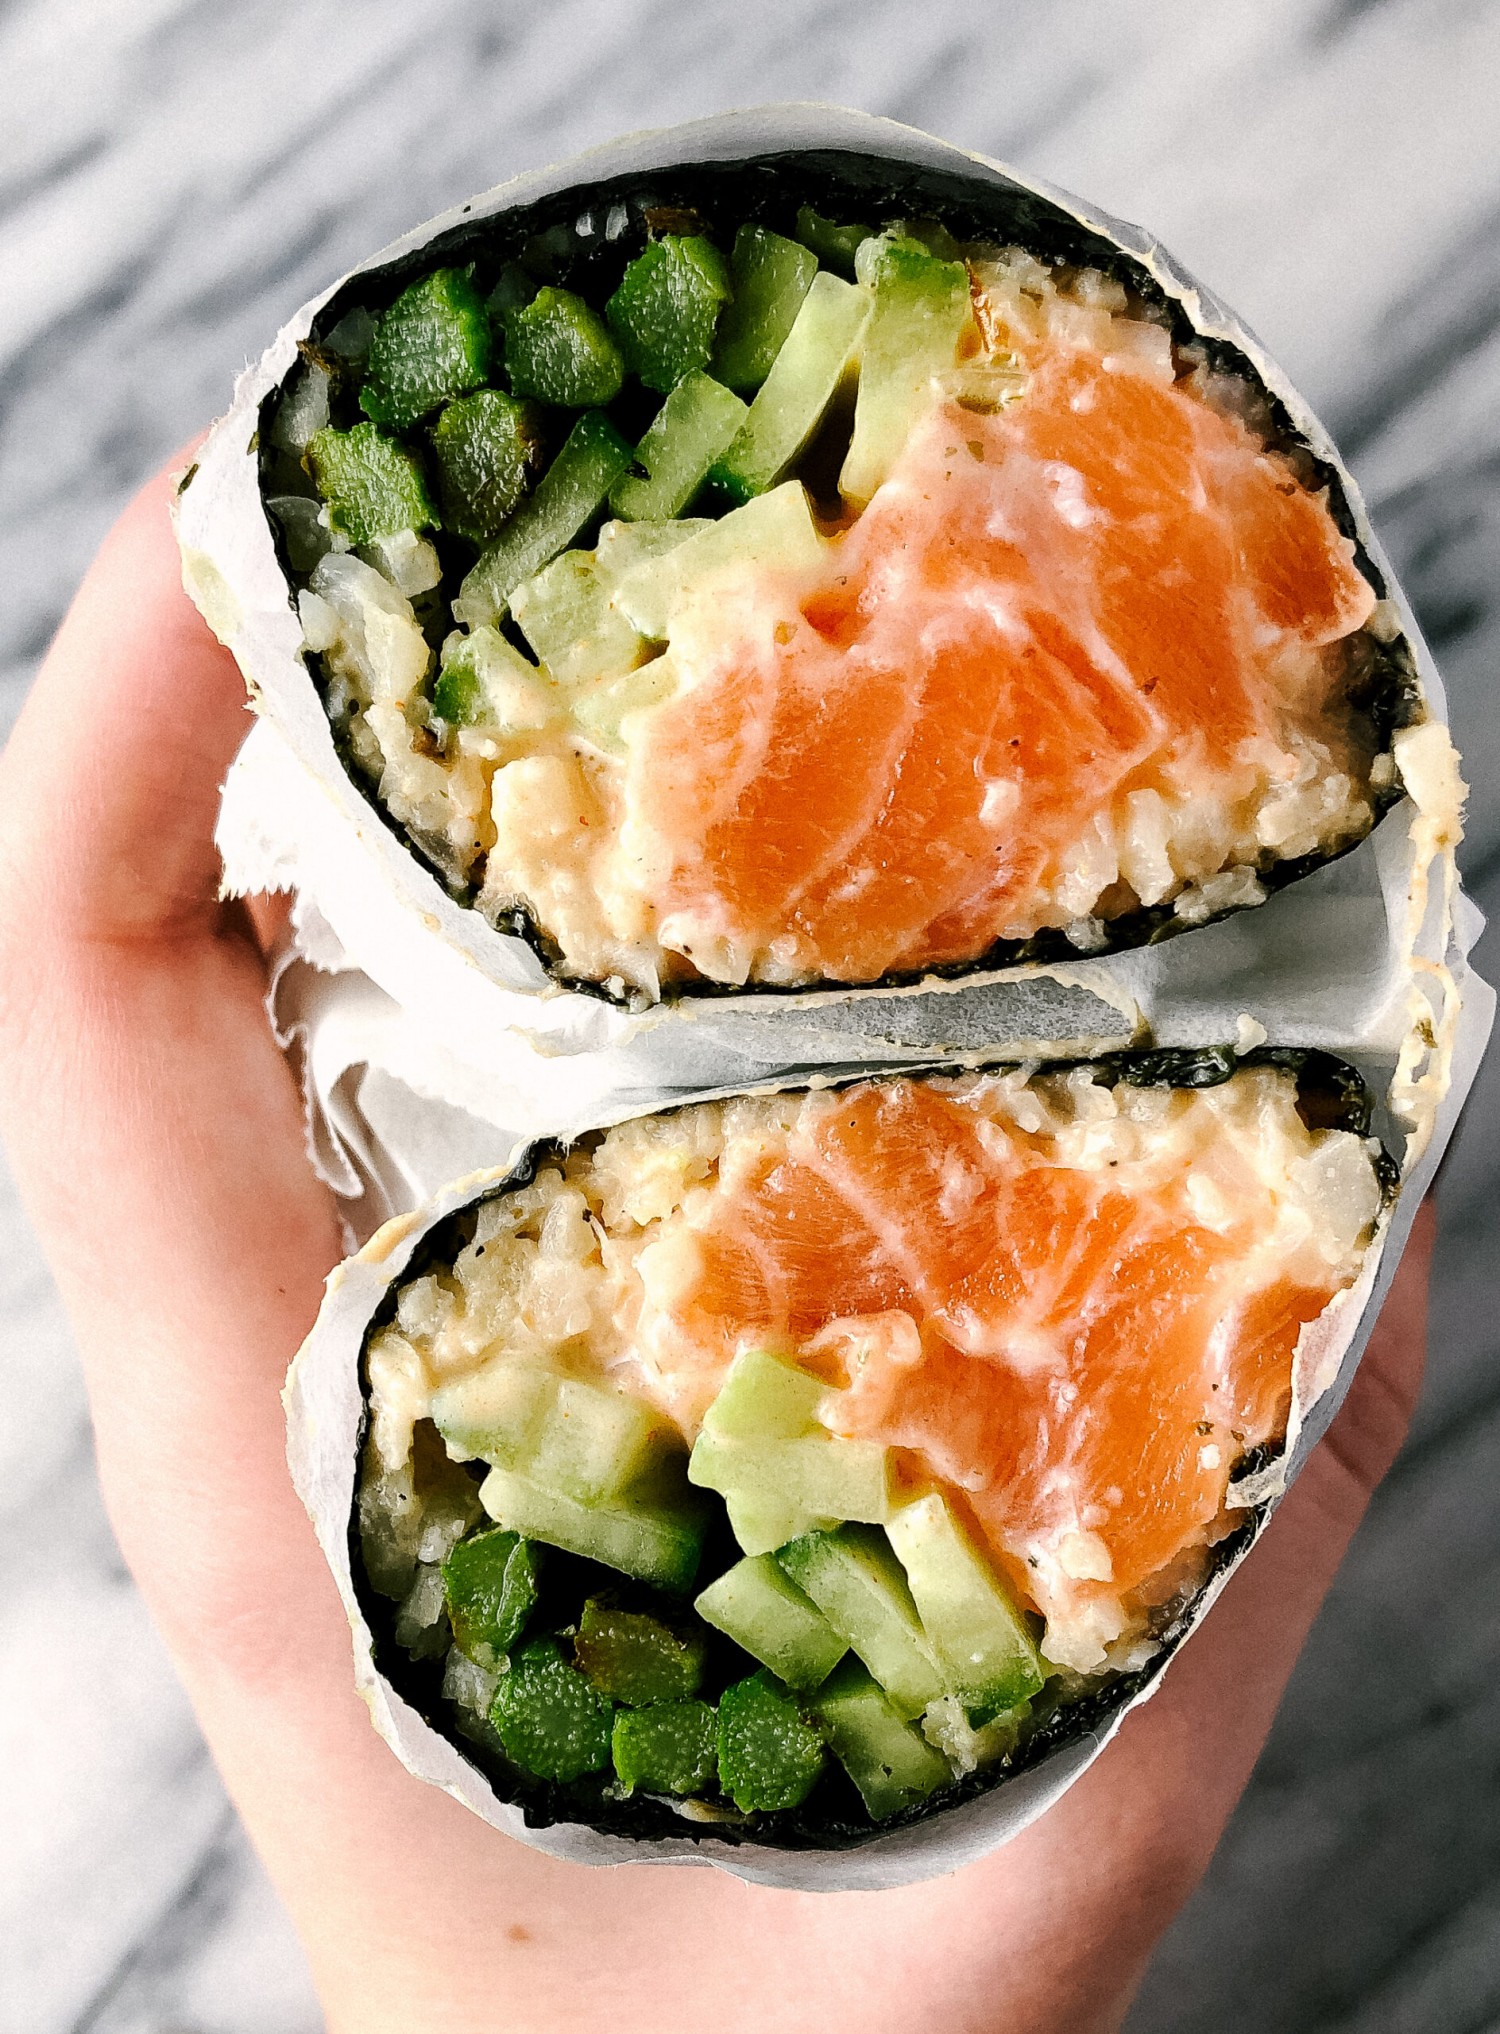 Side view of a sushi burrito cut in half. There is rice, raw salmon, veggies, and spicy mayo all wrapped in a sheet of nore